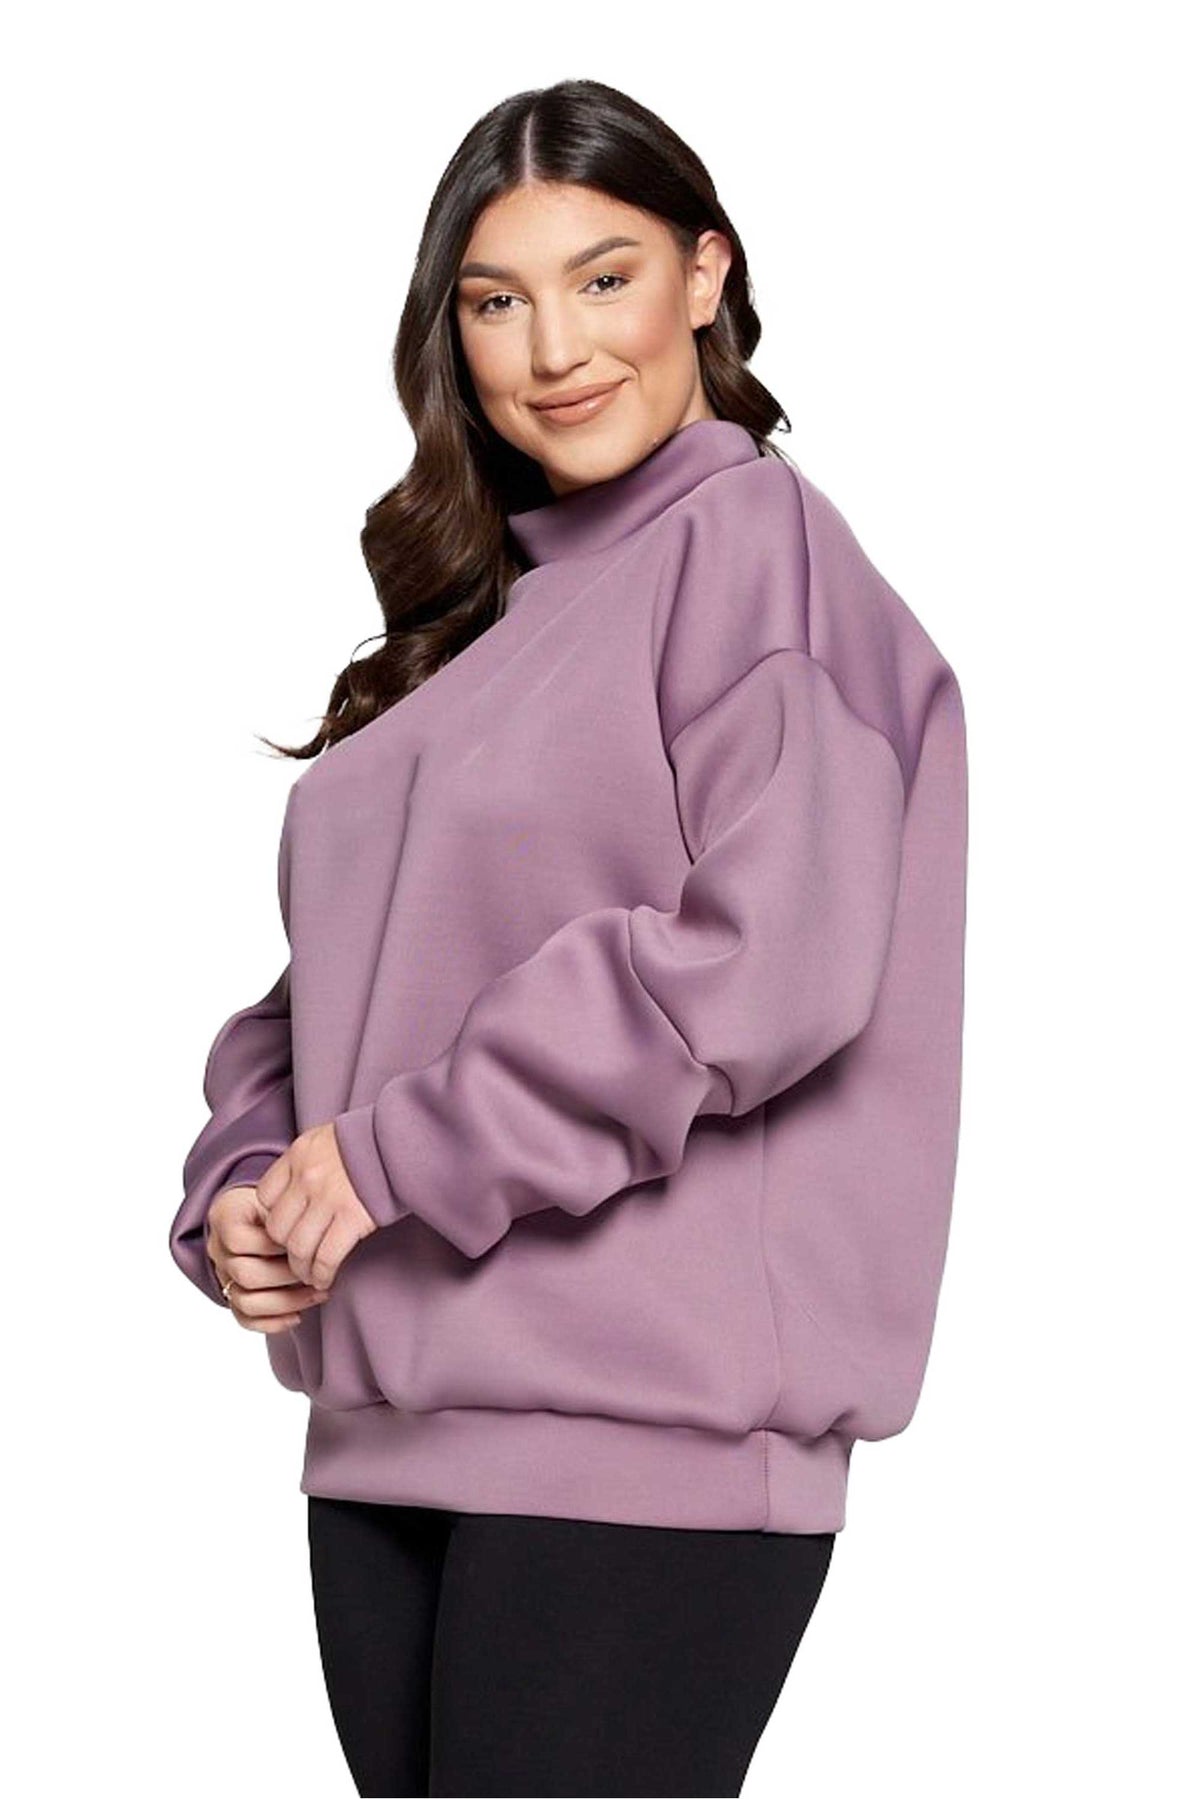 livd L I V D women's contemporary plus size boutique neoprene sweater sweatshirt with exaggerated sleeves in dusty plum lilac purple